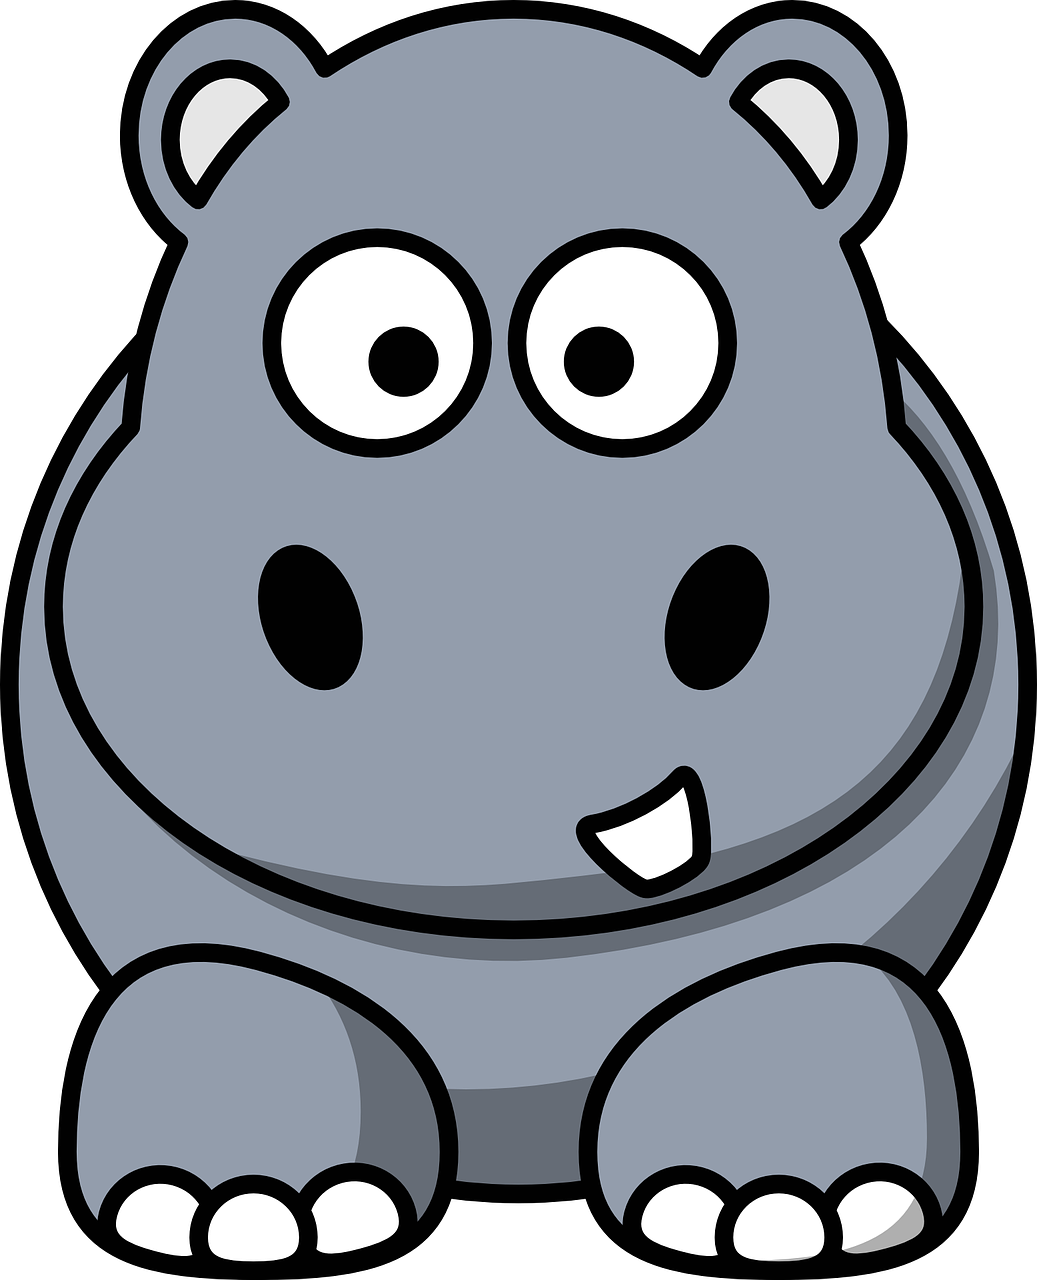 hippo-47726_1280.png